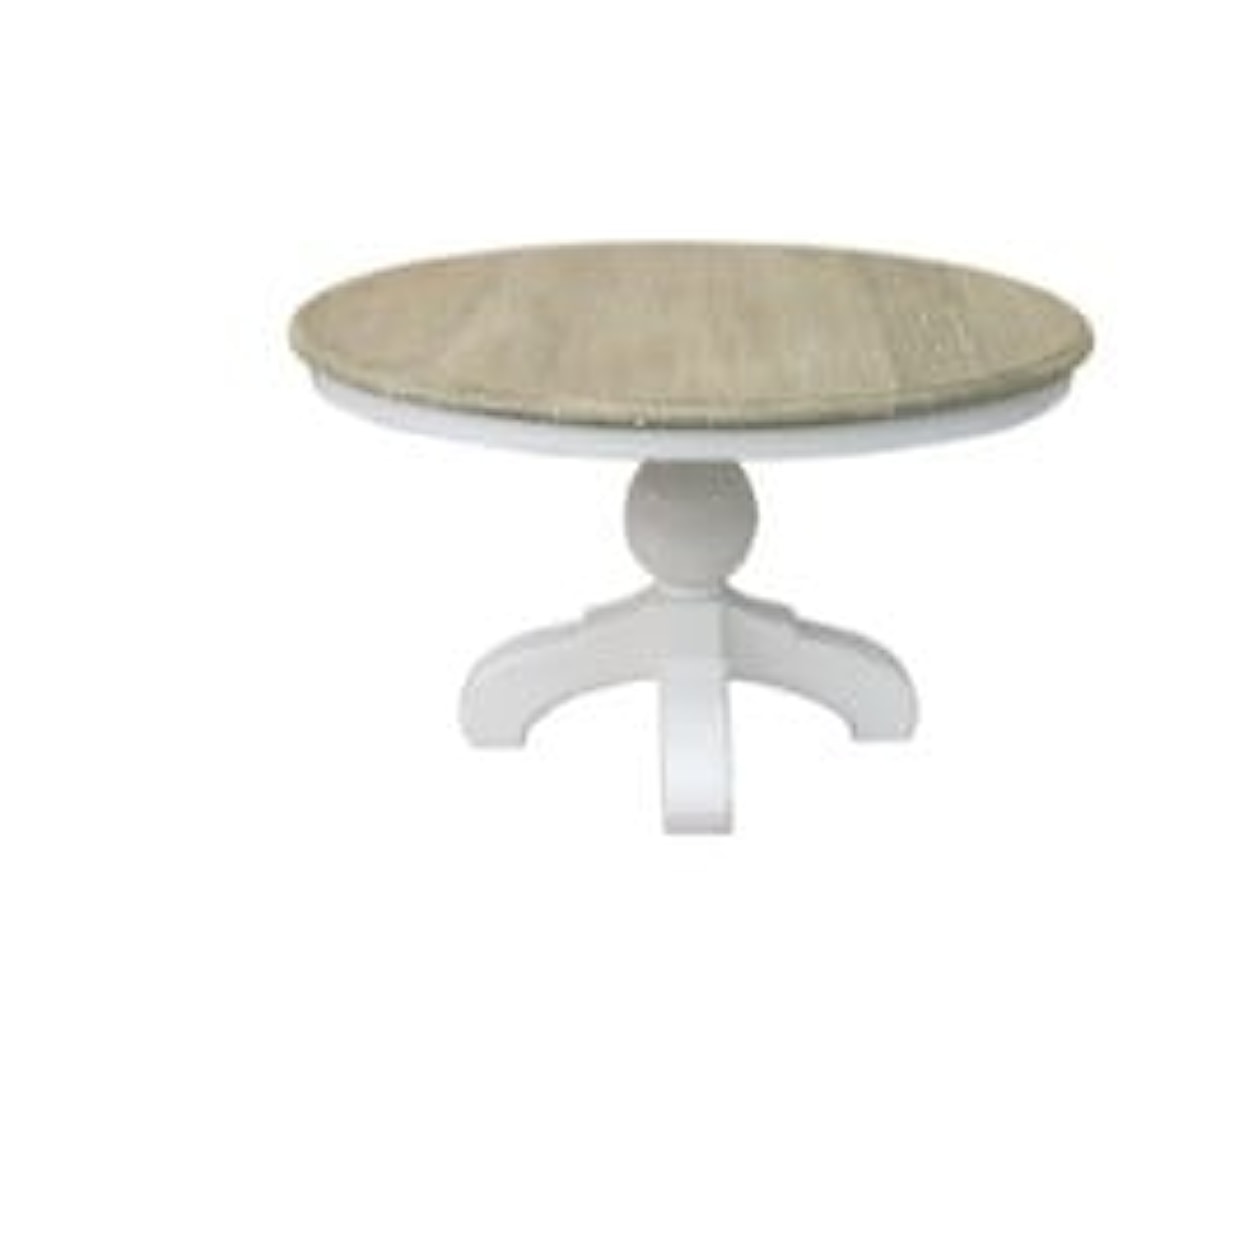 Trade Winds Furniture Occasional Table Groups SOHO COFFEE TABLE